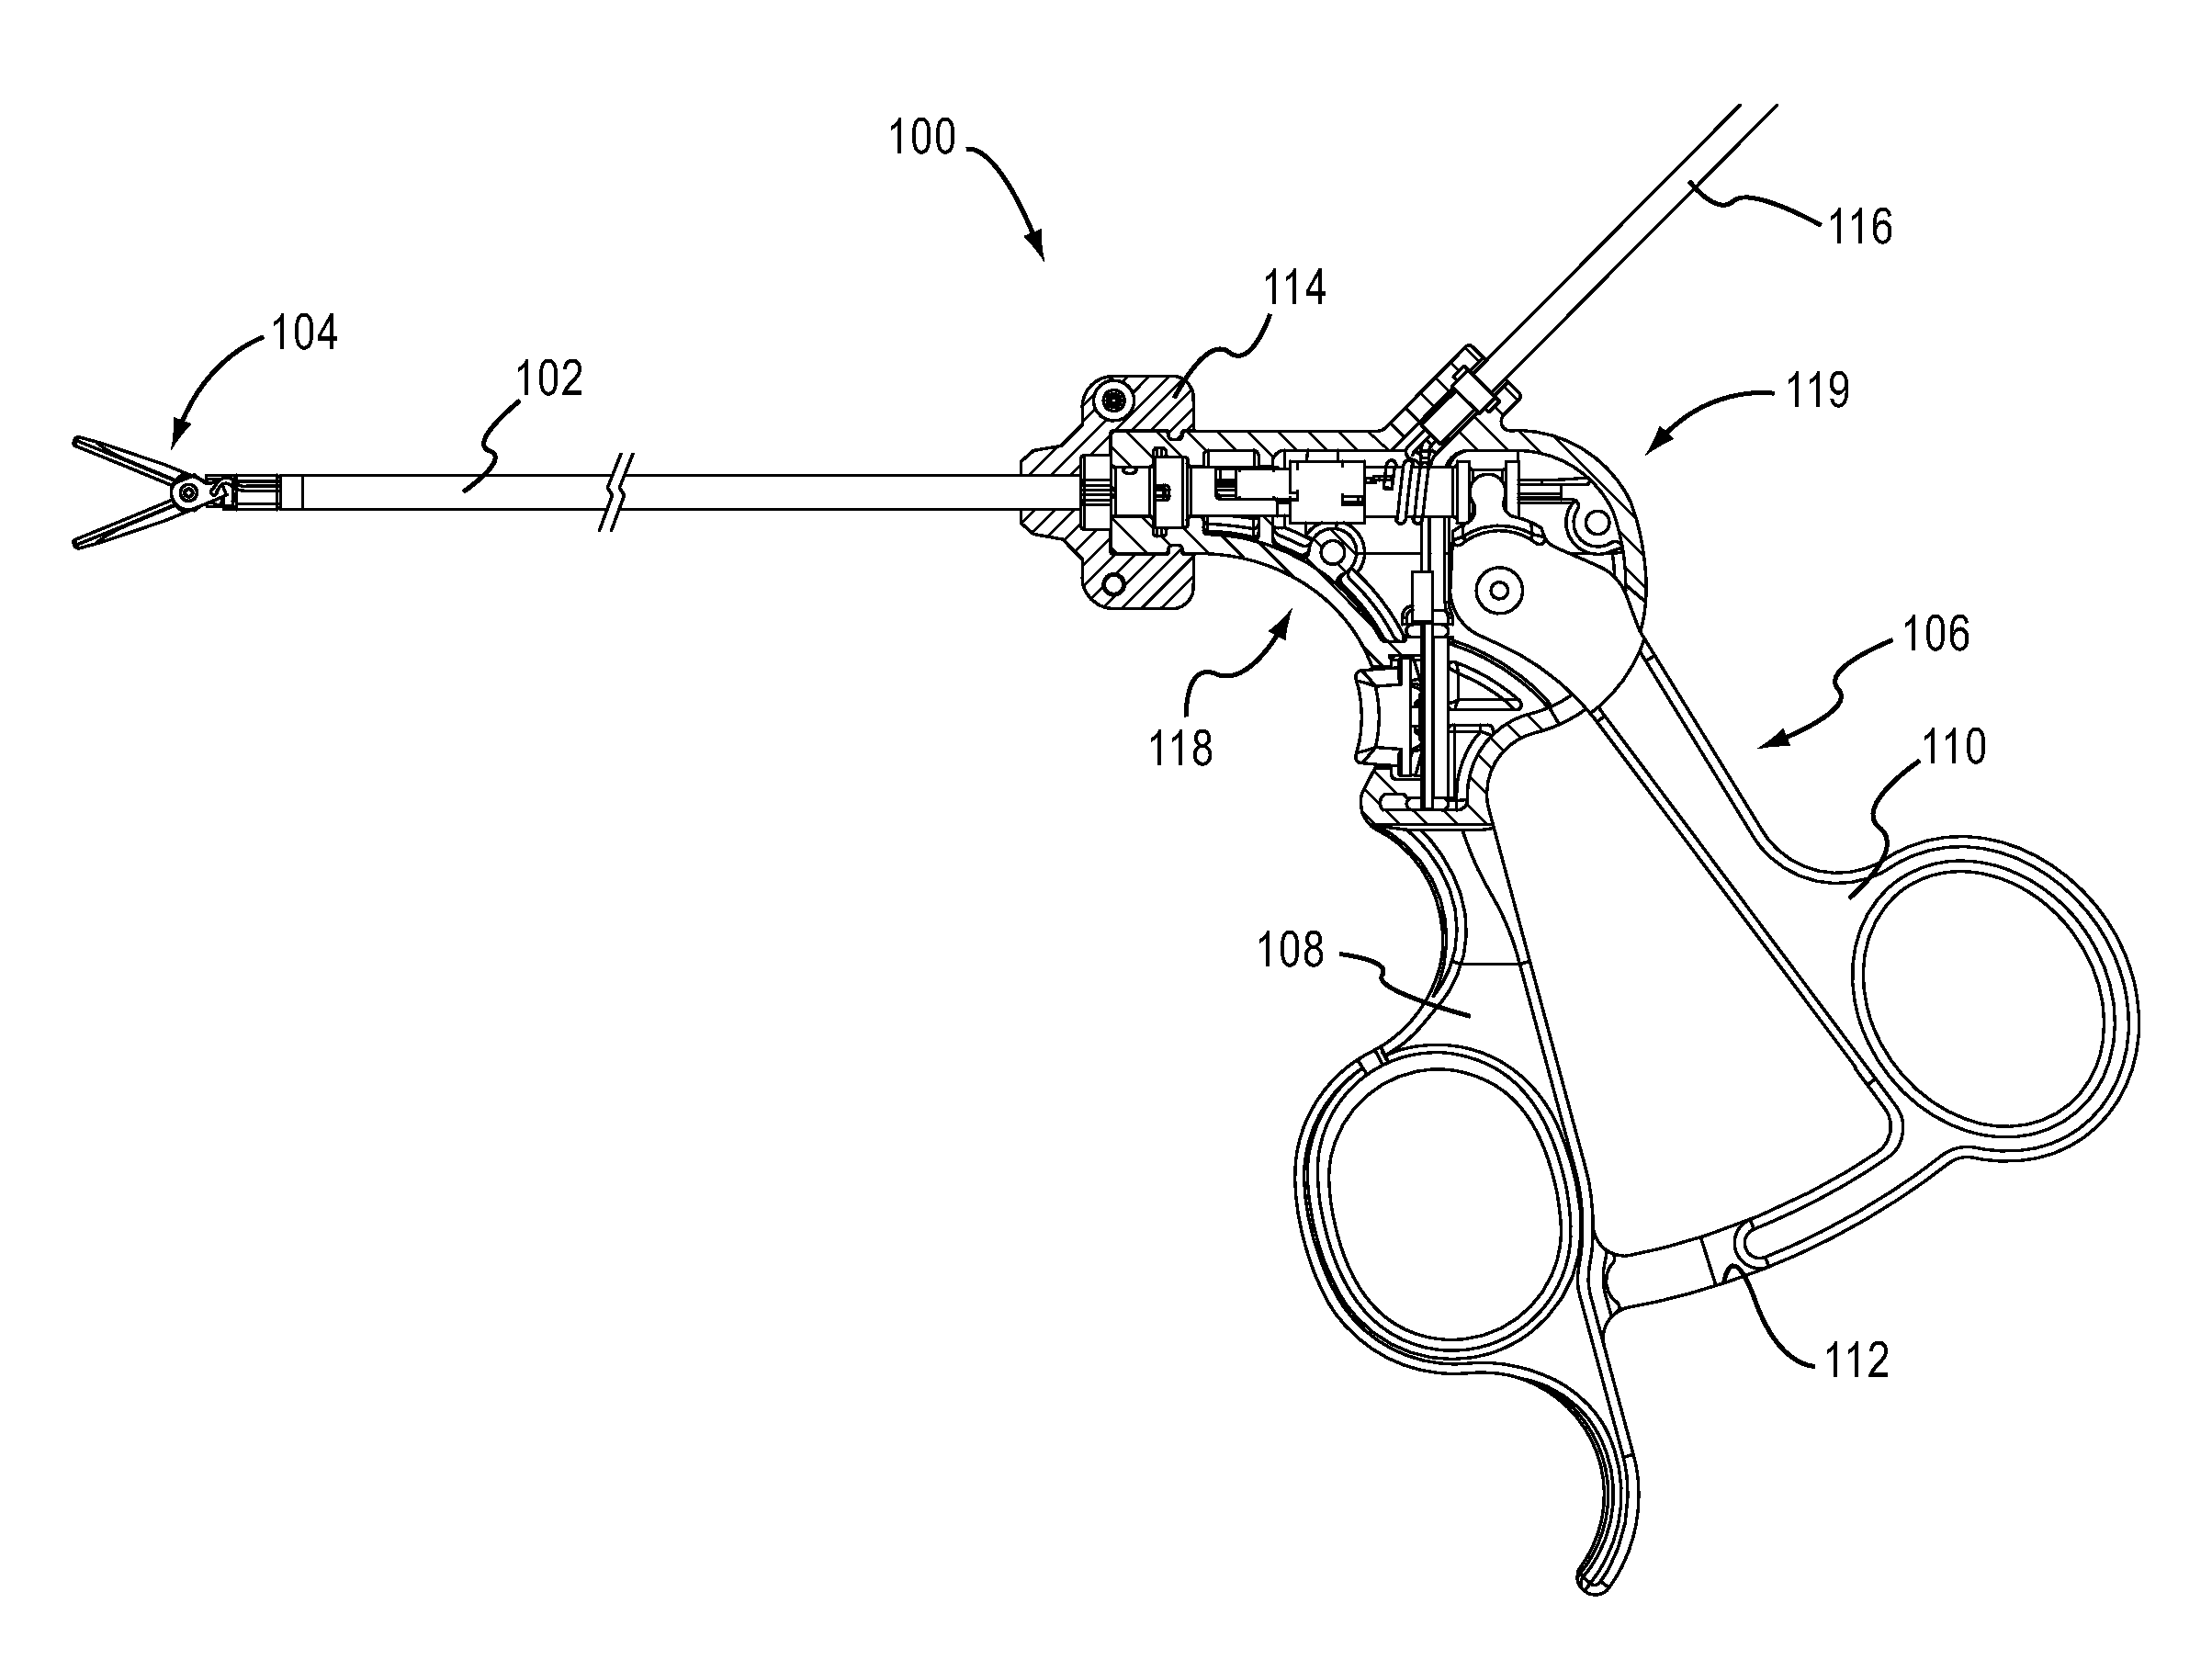 Low power tissue sealing device and method